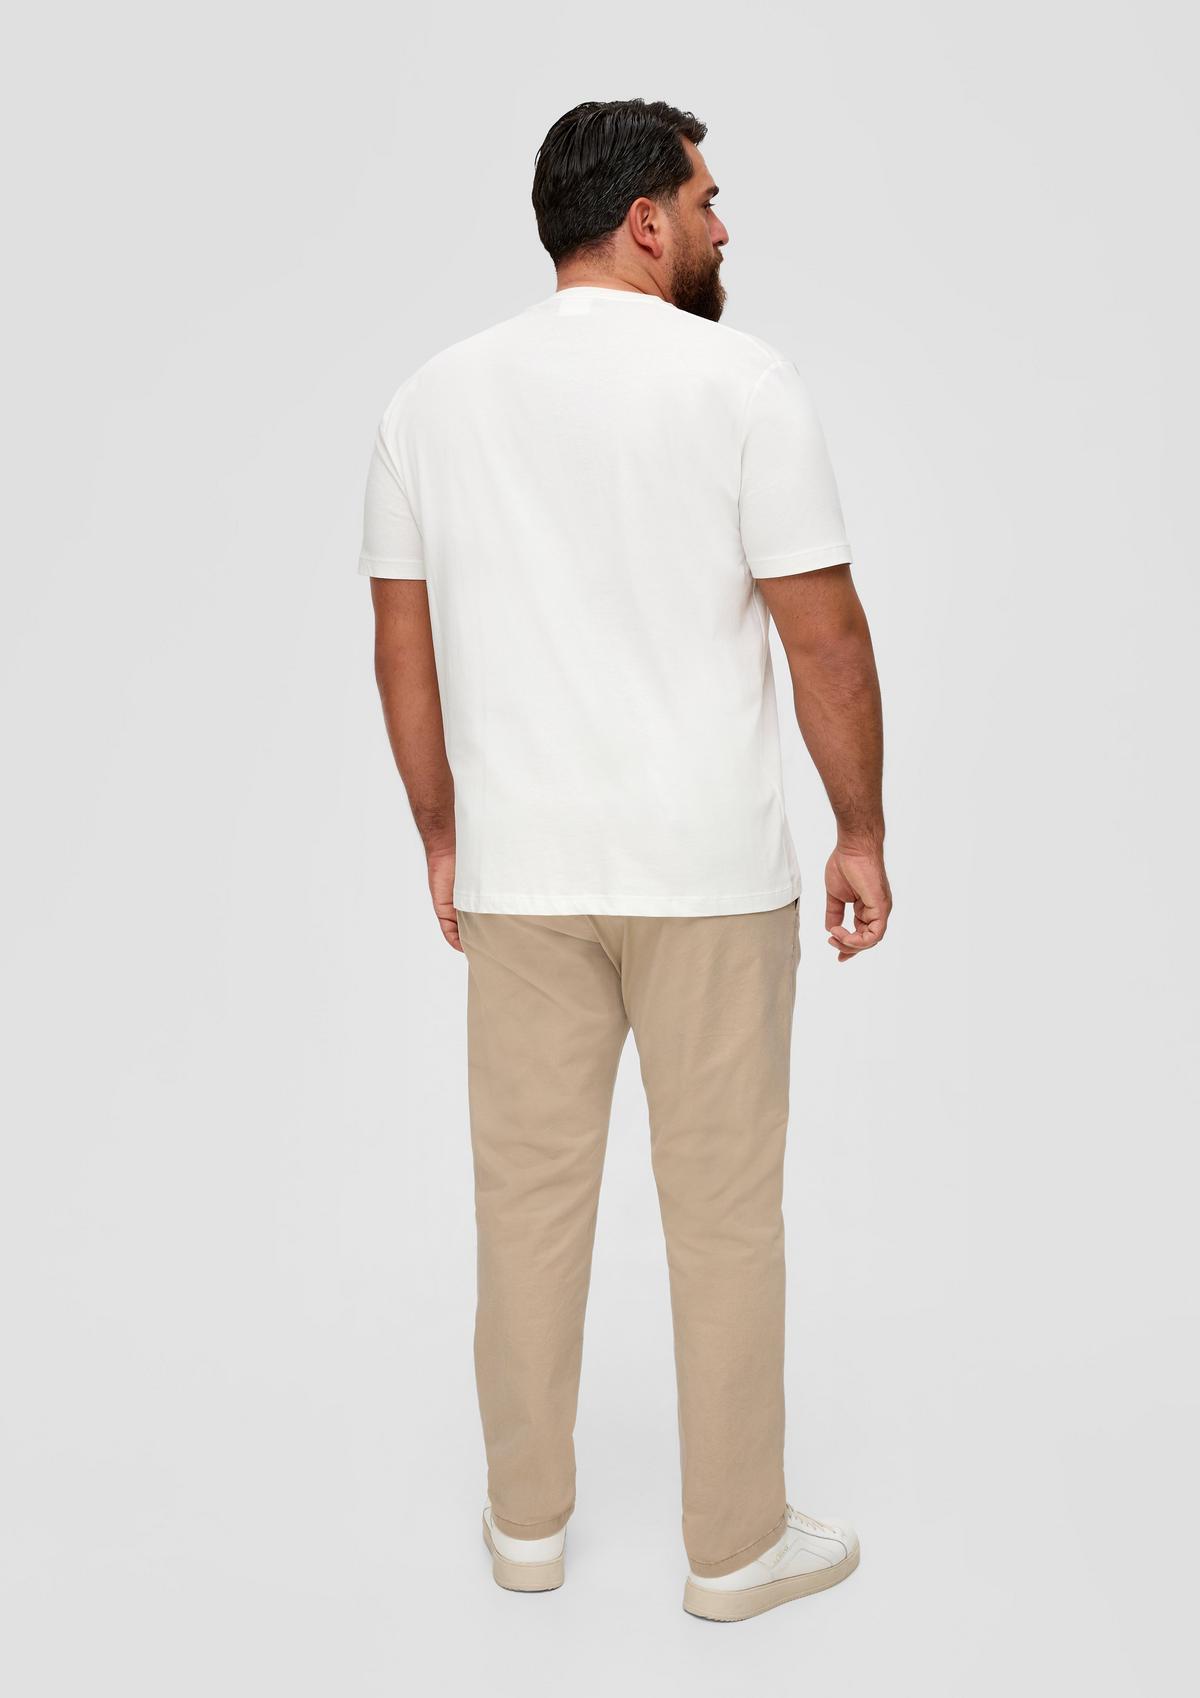 s.Oliver Detroit: chino met relaxed fit